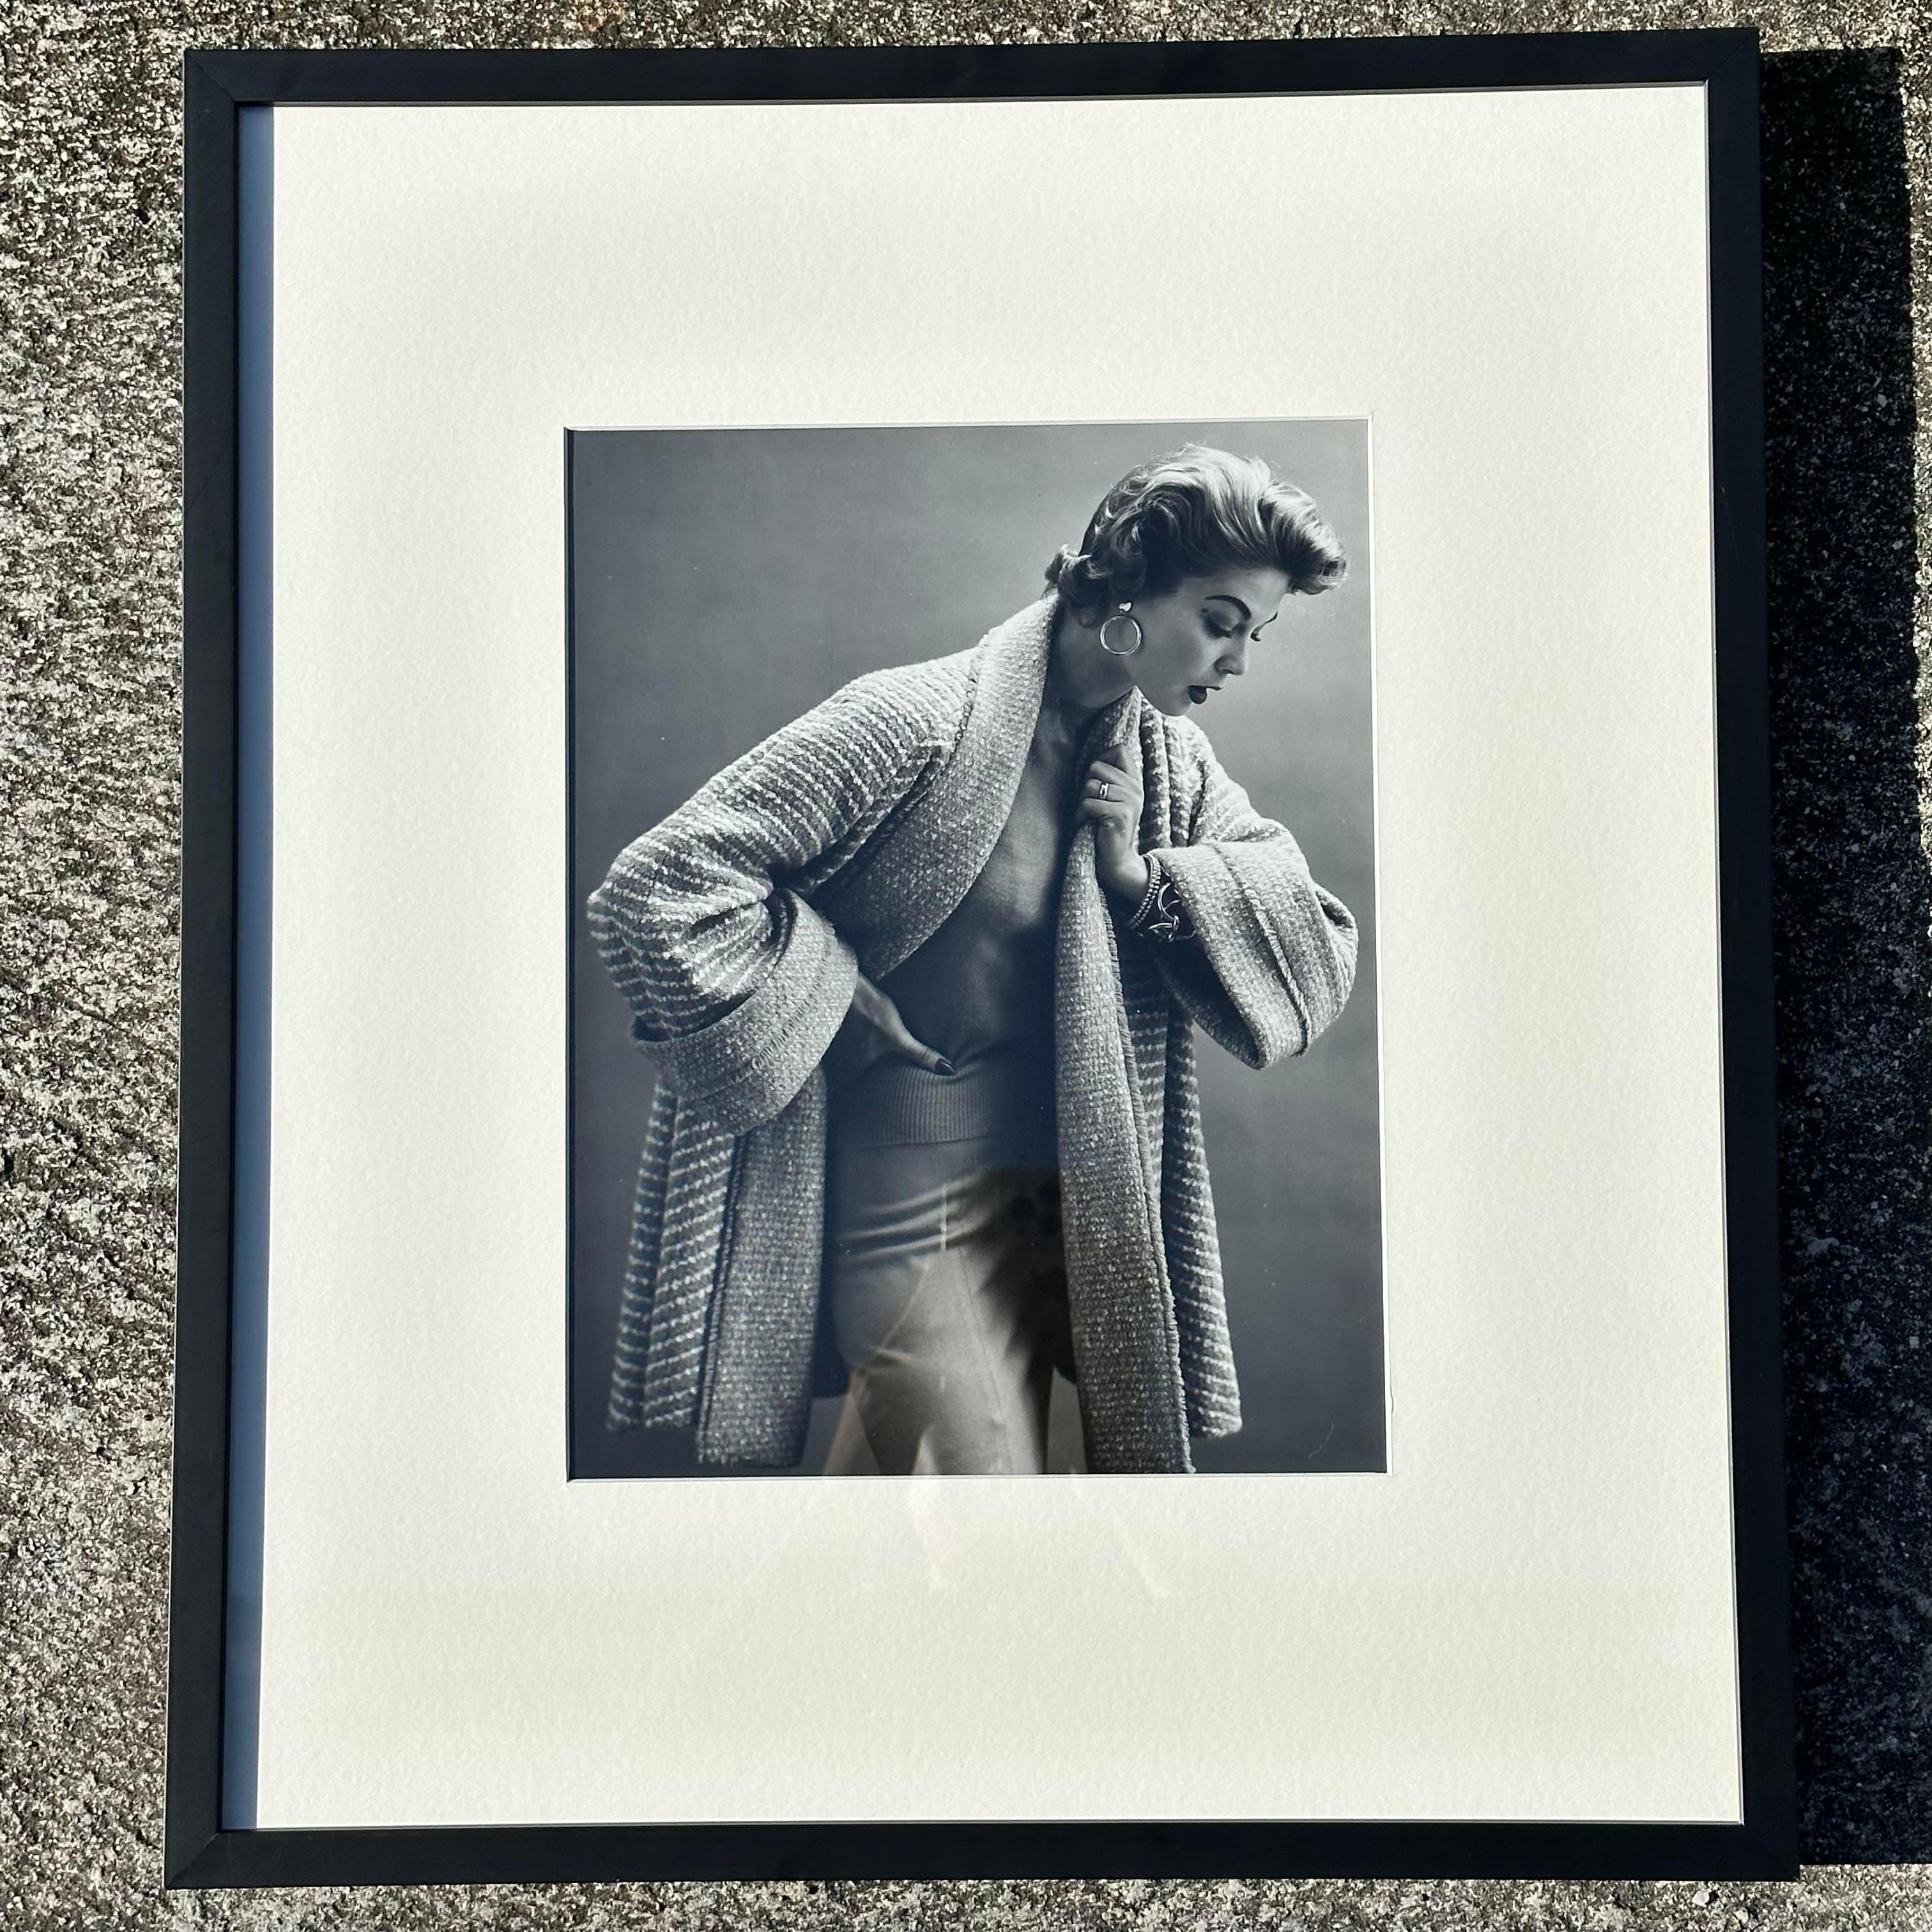 A gorgeous vintage 1950 photograph of a woman in a fashion photoshoot. The picture is framed a very fitting black frame that makes the picture classy. It looks great alone or in a set. Acquired at a Palm Beach estate.